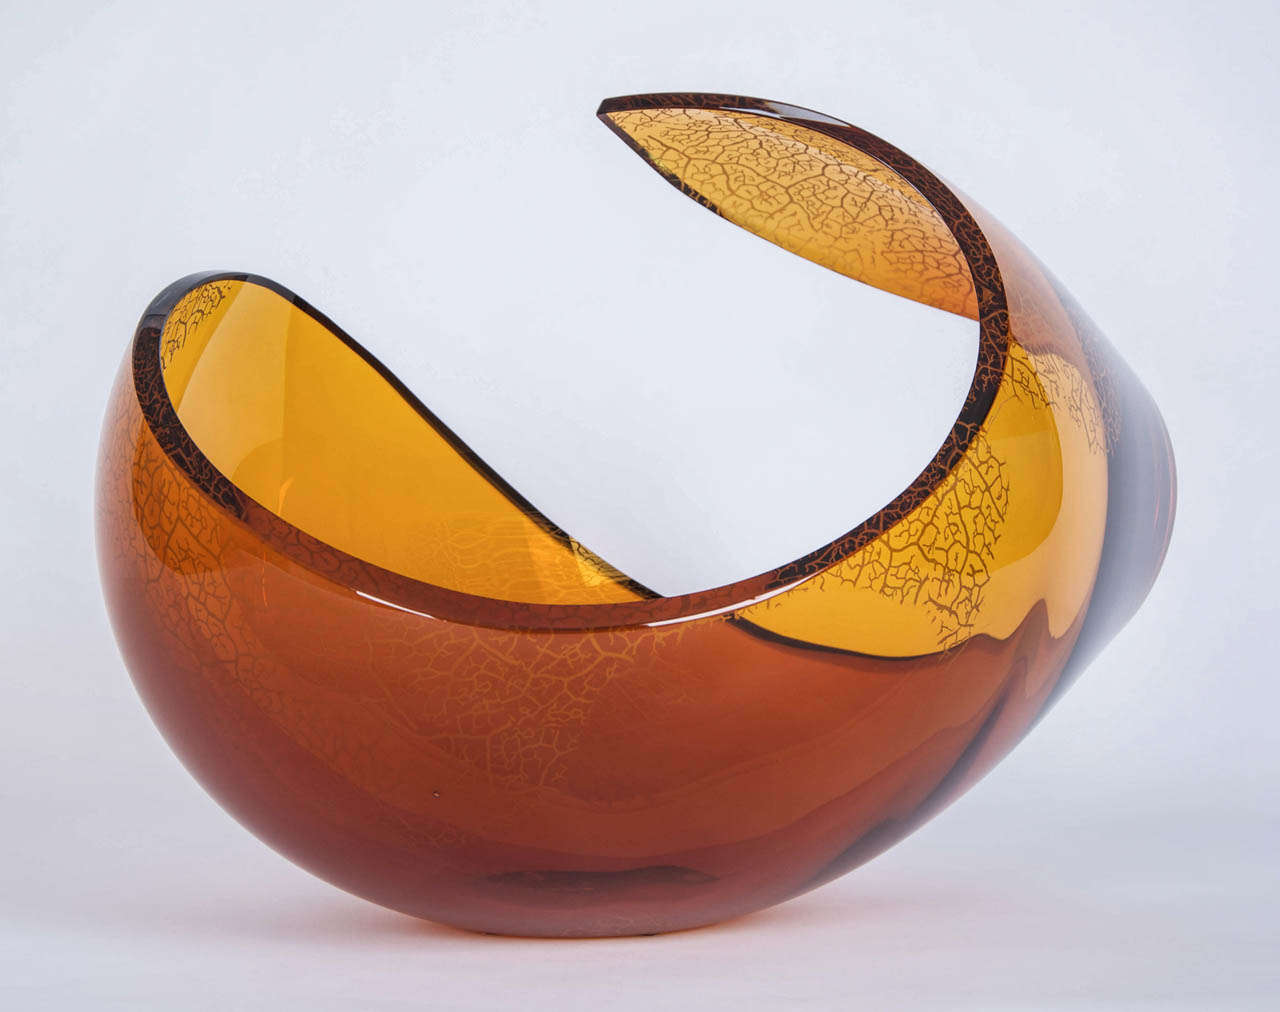 Free-form blown sculptural glass bowl by Lena Bergstrom. Amber/gold glass with engraved surface pattern. Unique piece.